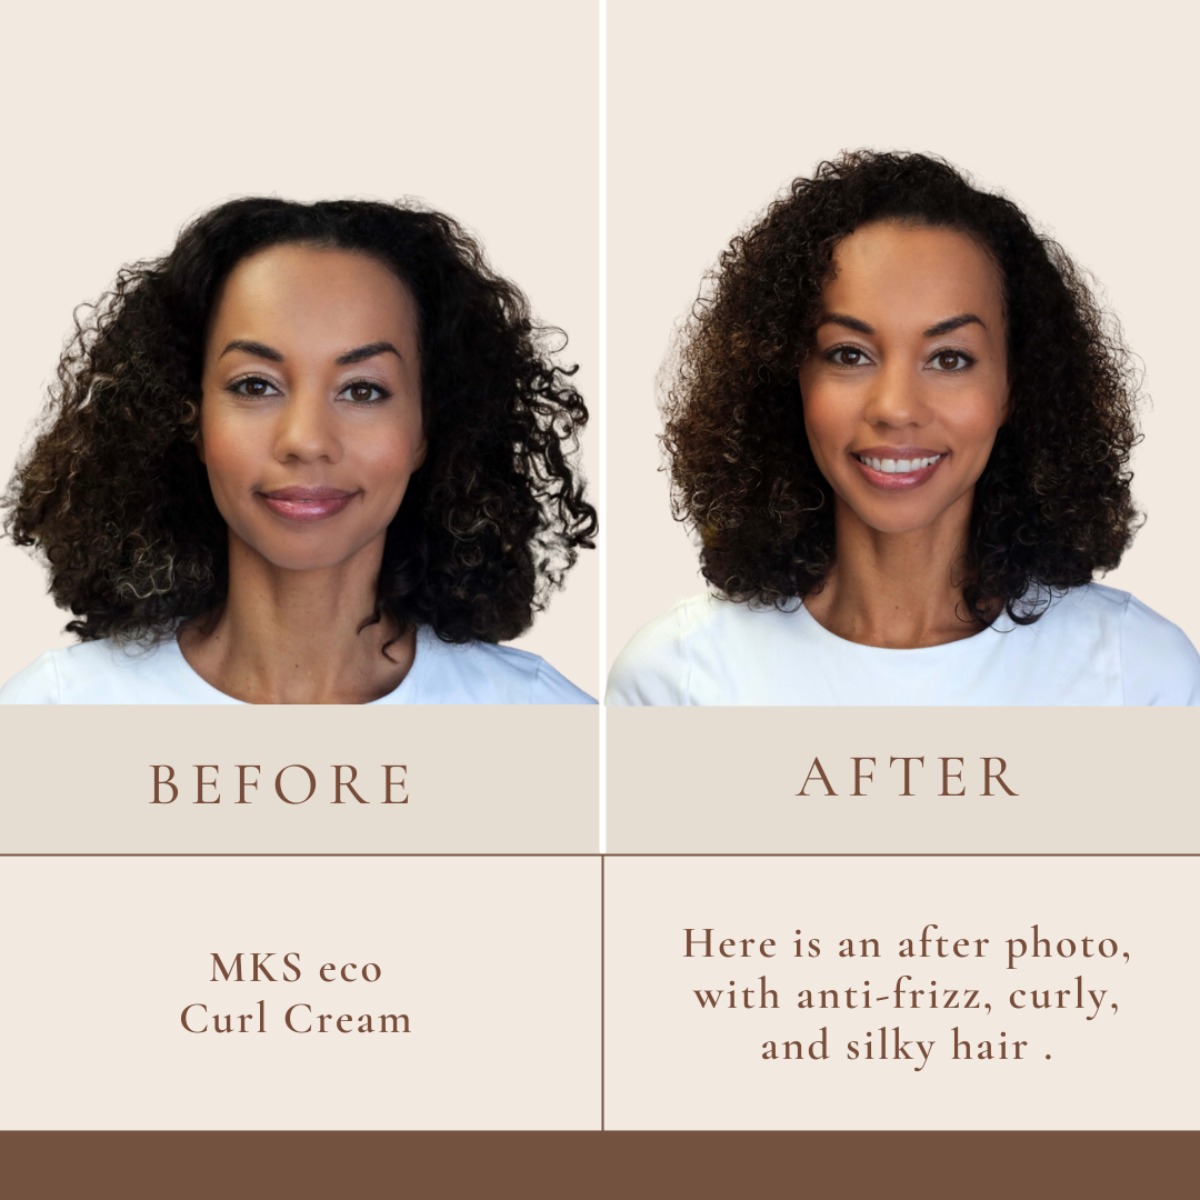 MKS eco Curl Cream Before After